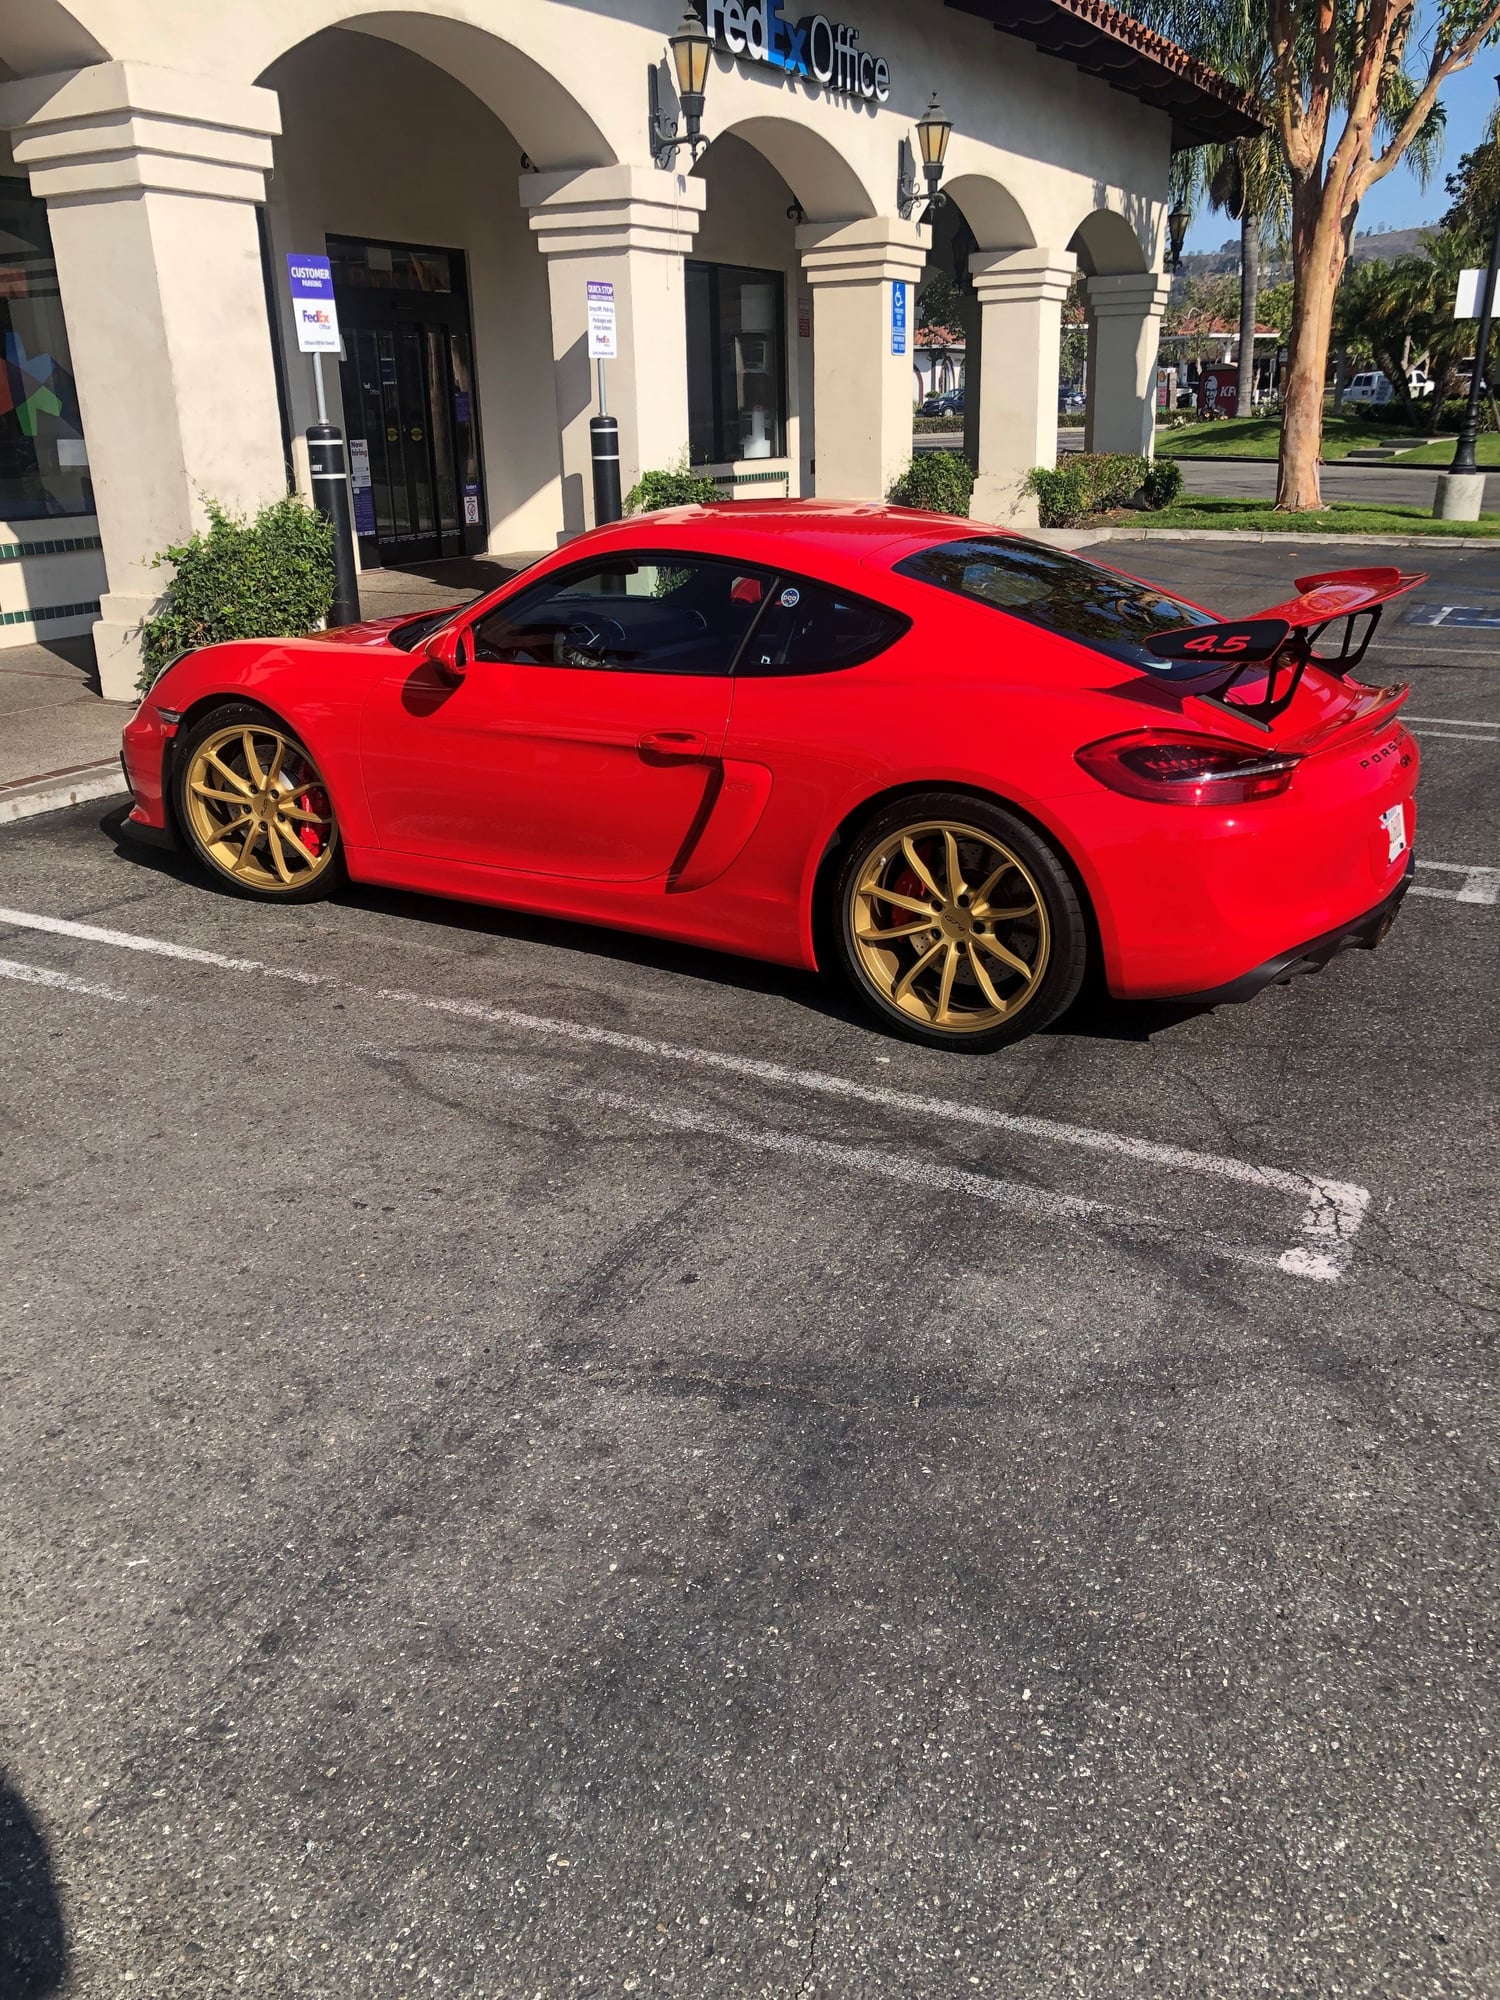 2016 Porsche Cayman GT4 - 2016 Porsche GT4 with DeMan Motorsports 4.5L conversion, ready today - avoid the wait - Used - VIN wp0ac2a8xgk197463 - 14,400 Miles - Coupe - Red - Laguna Niguel, CA 92677, United States